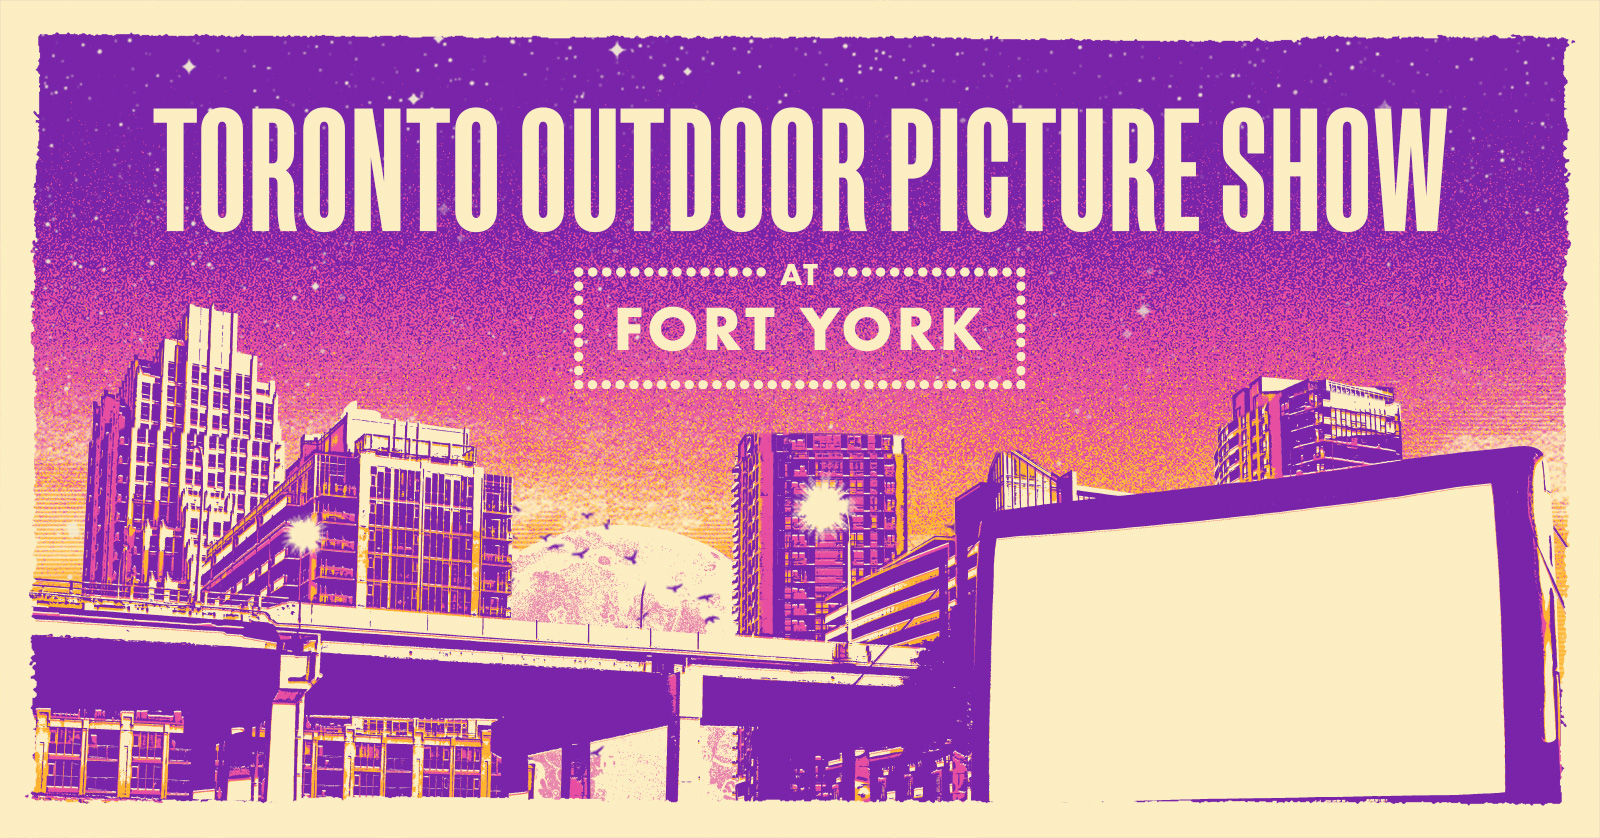 Toronto Outdoor Picture Show Event